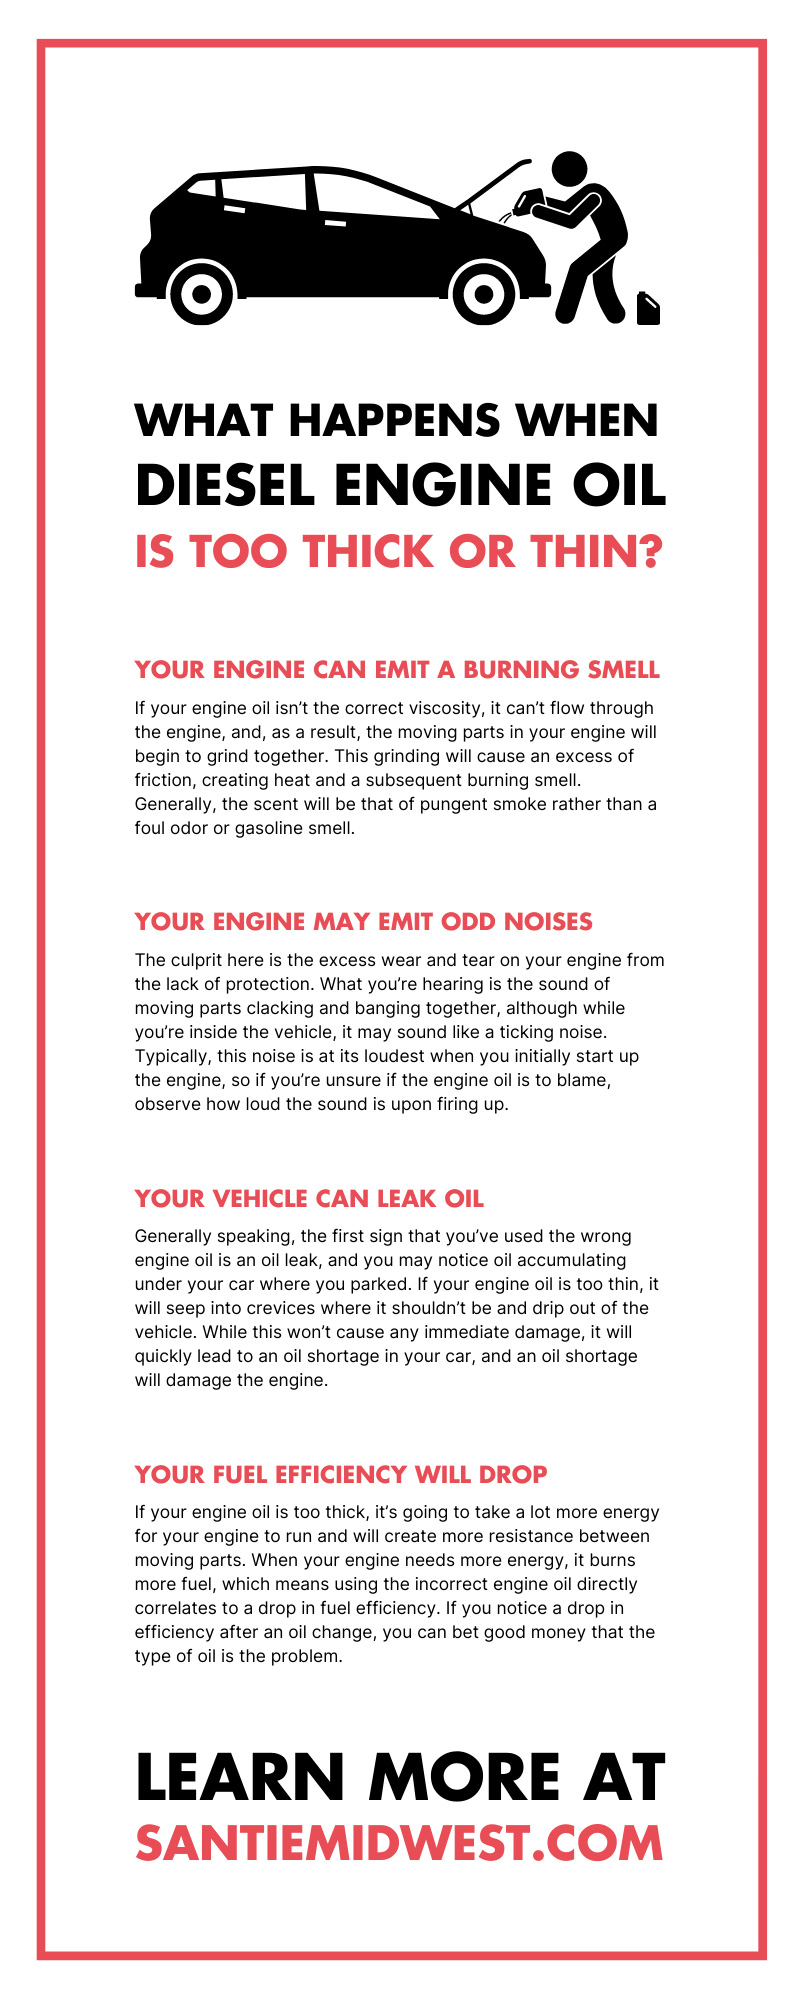 What Happens When Diesel Engine Oil Is Too Thick or Thin?